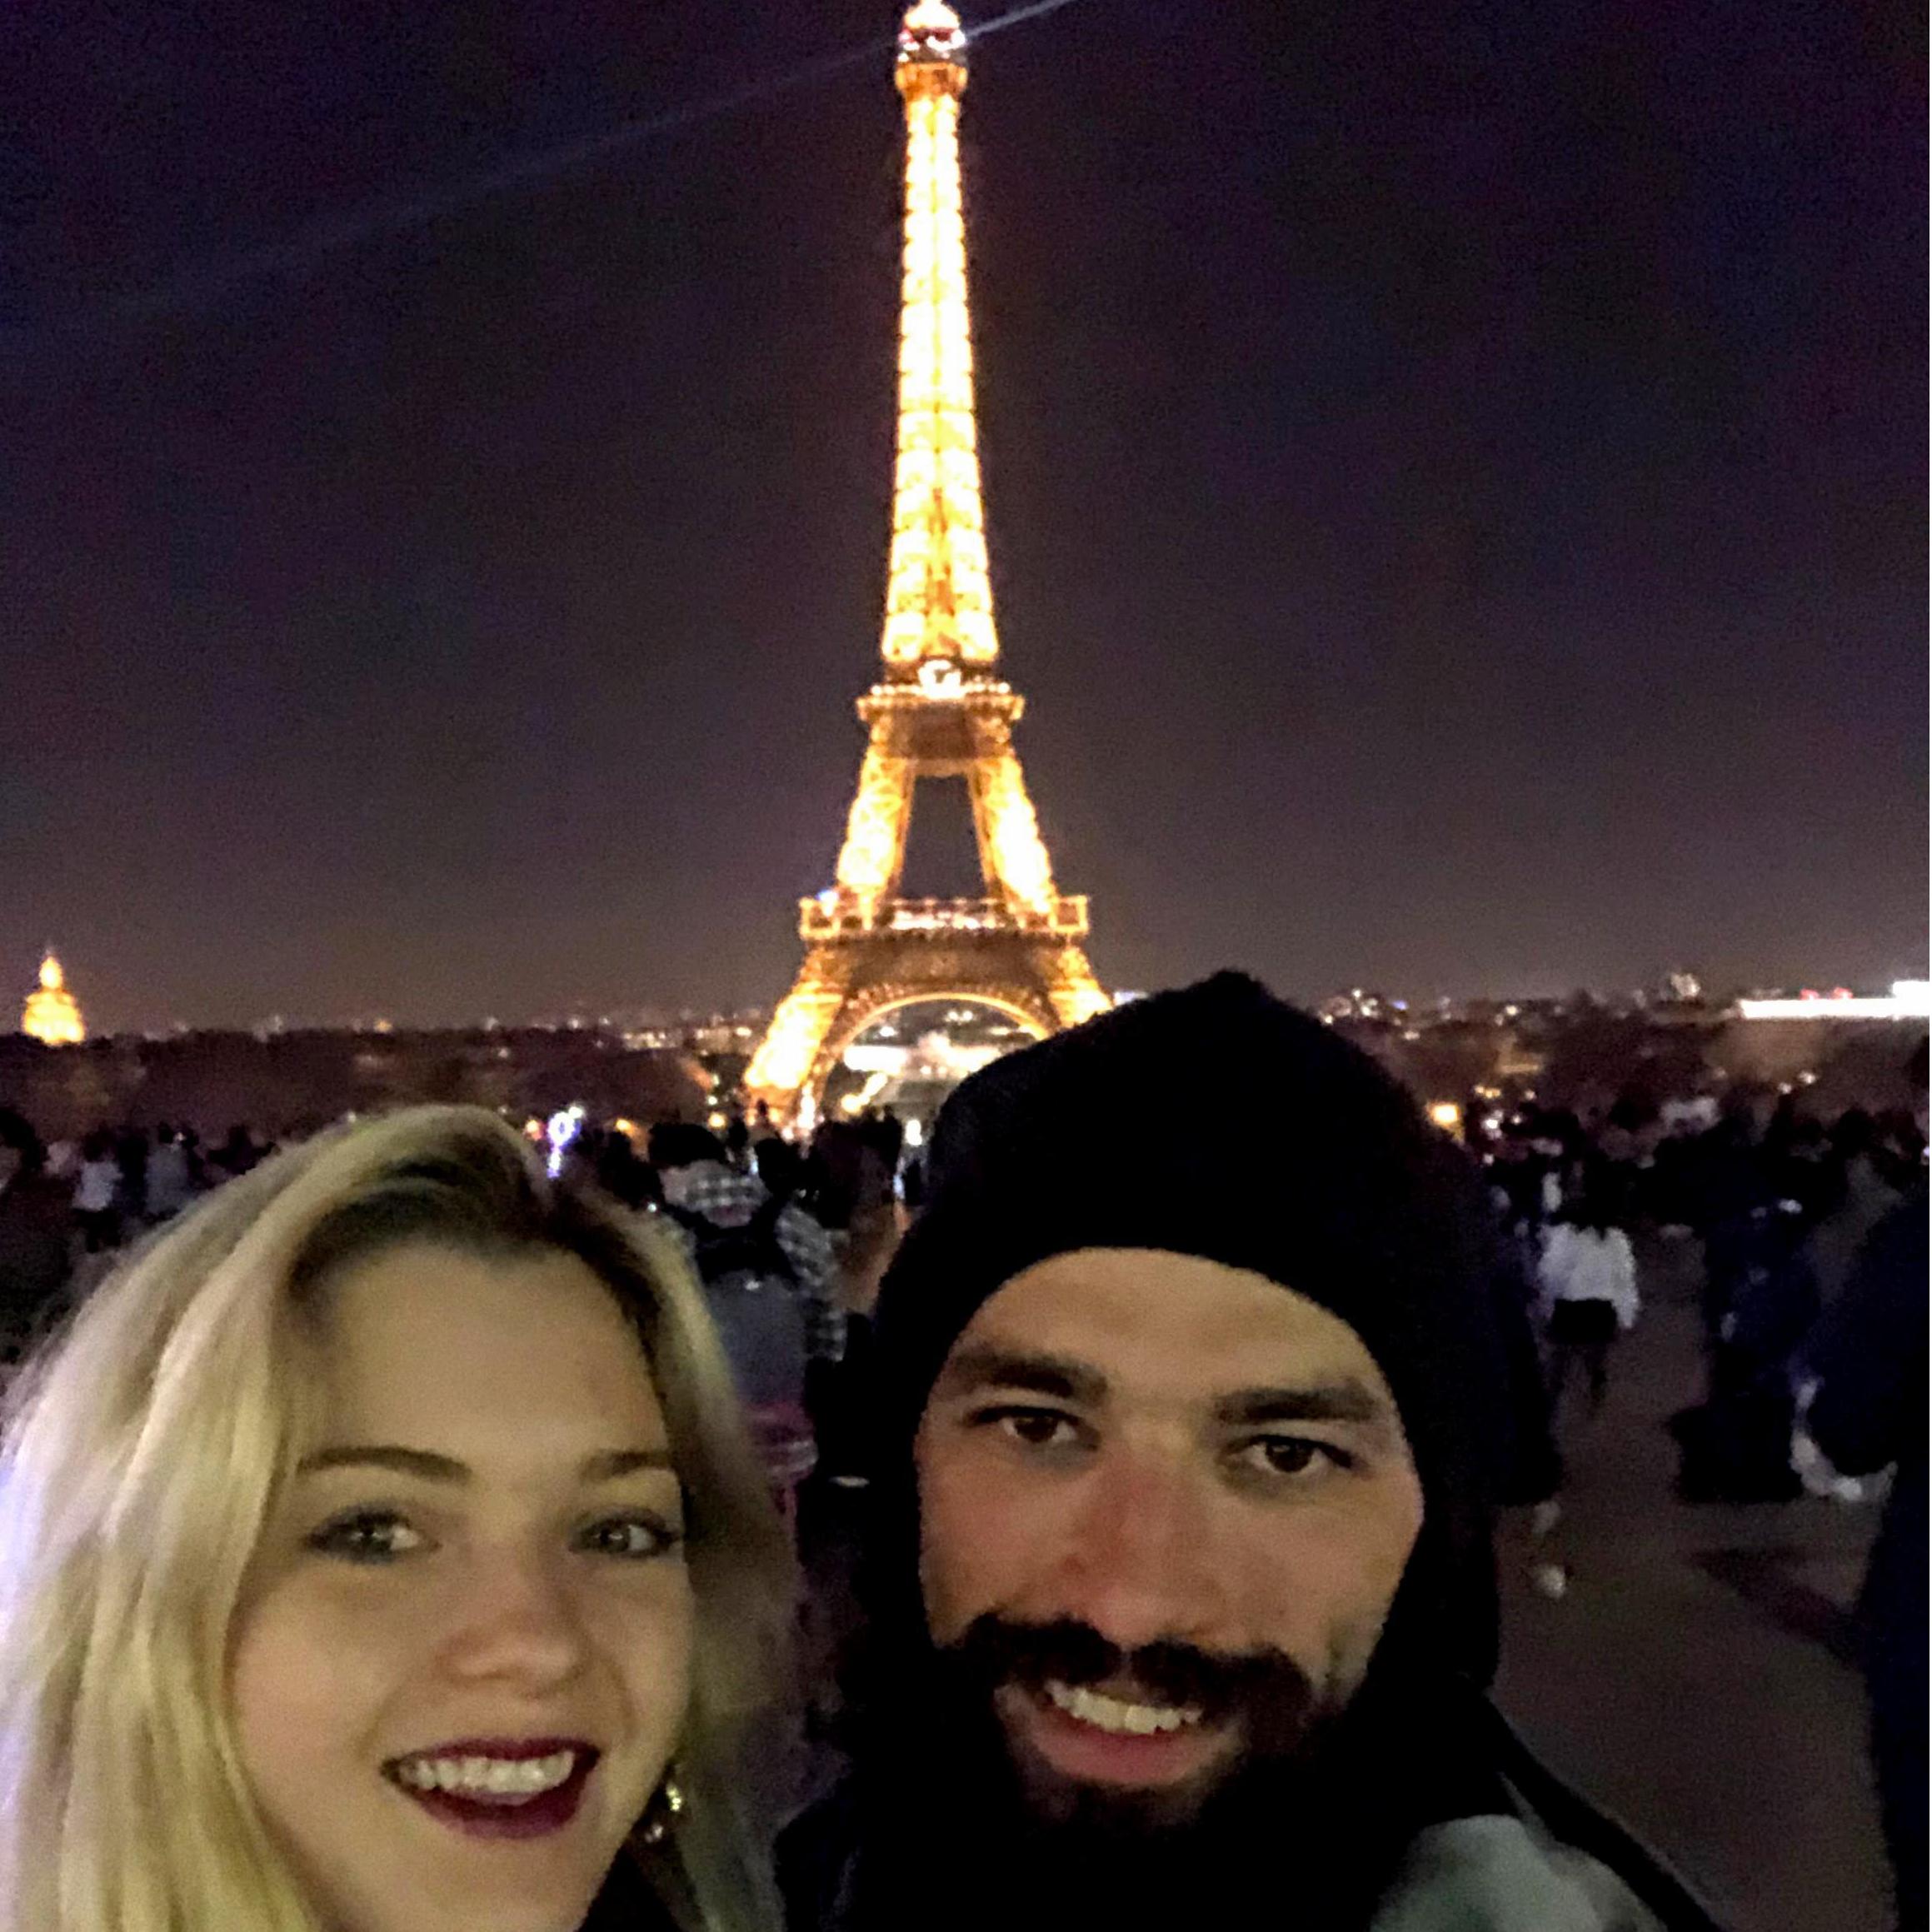 In the city of love, admiring the Eiffel Tower at night.